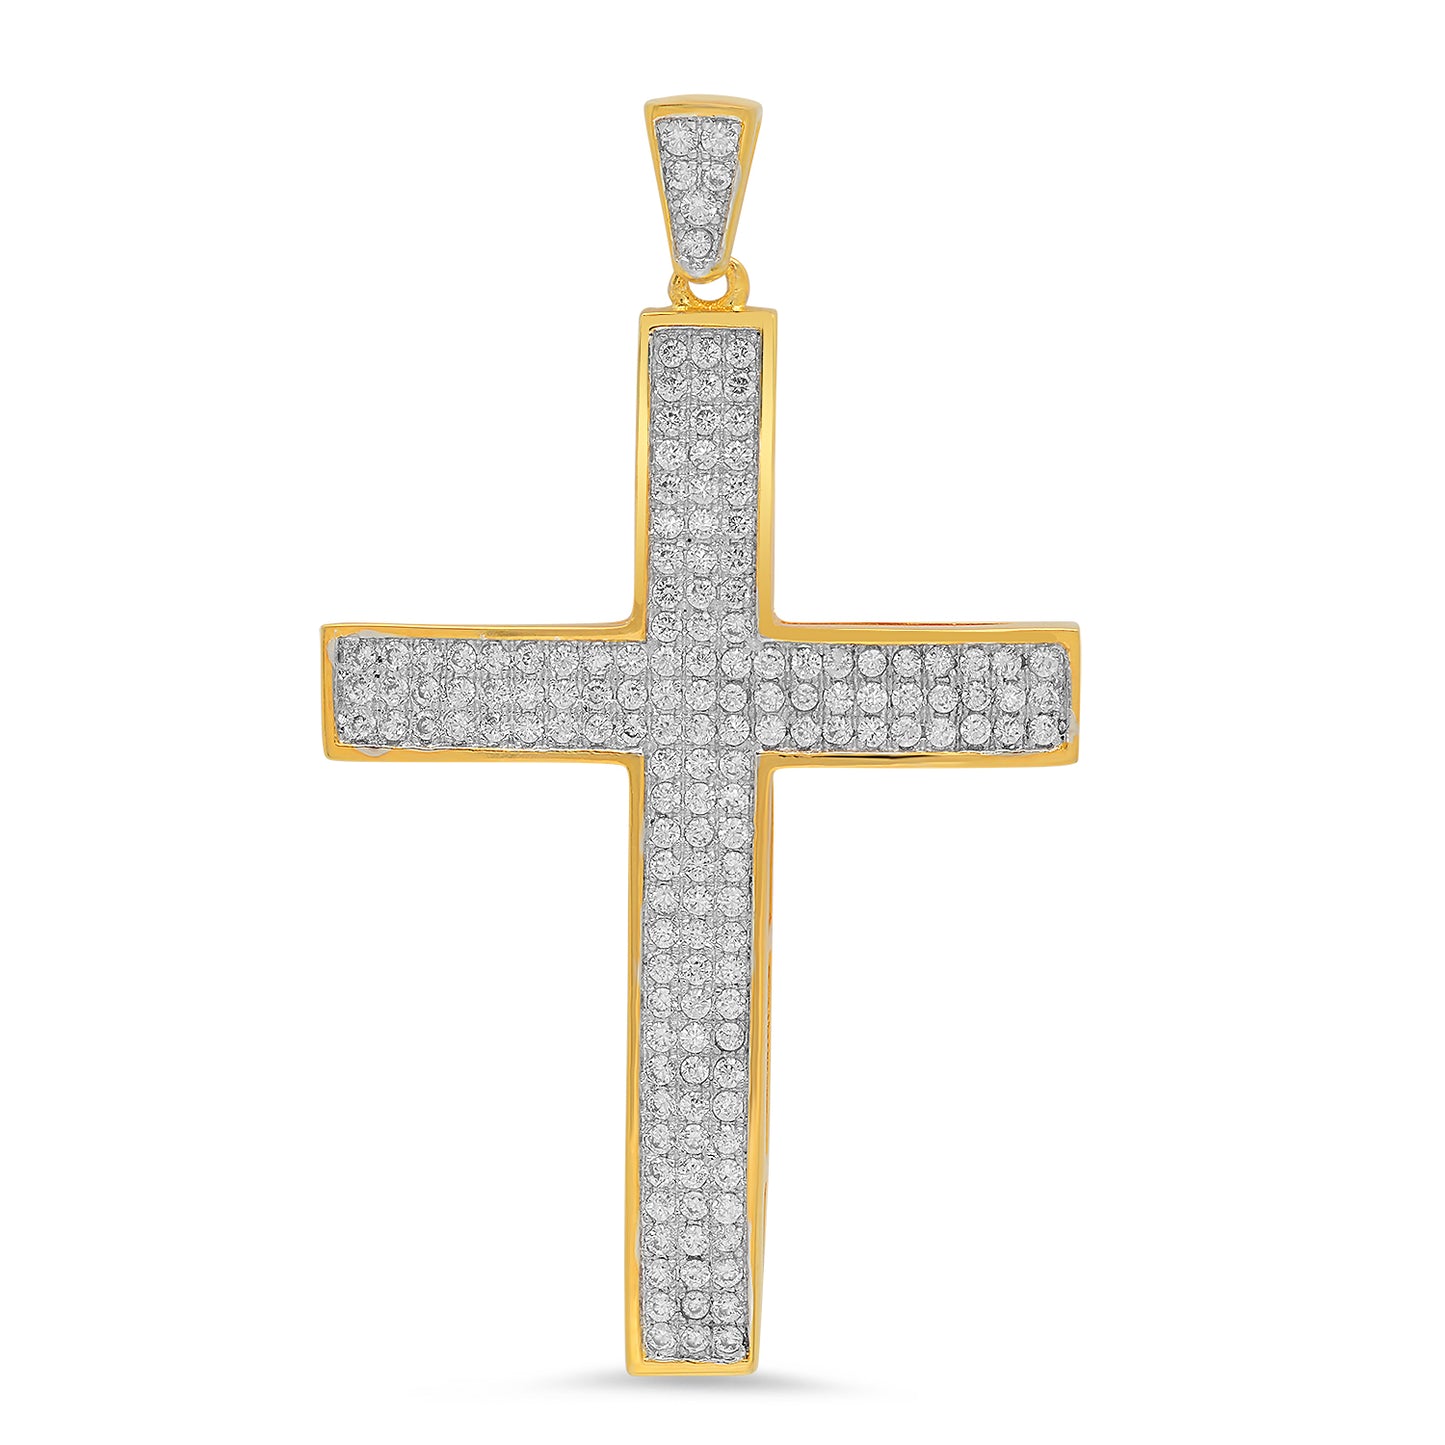 Large Iced Out 25.3mm x 37.8mm Two-Tone 14k Gold CZ Cross Pendant + Jewelry Polishing Cloth (SKU: TT-PDCZ1002)